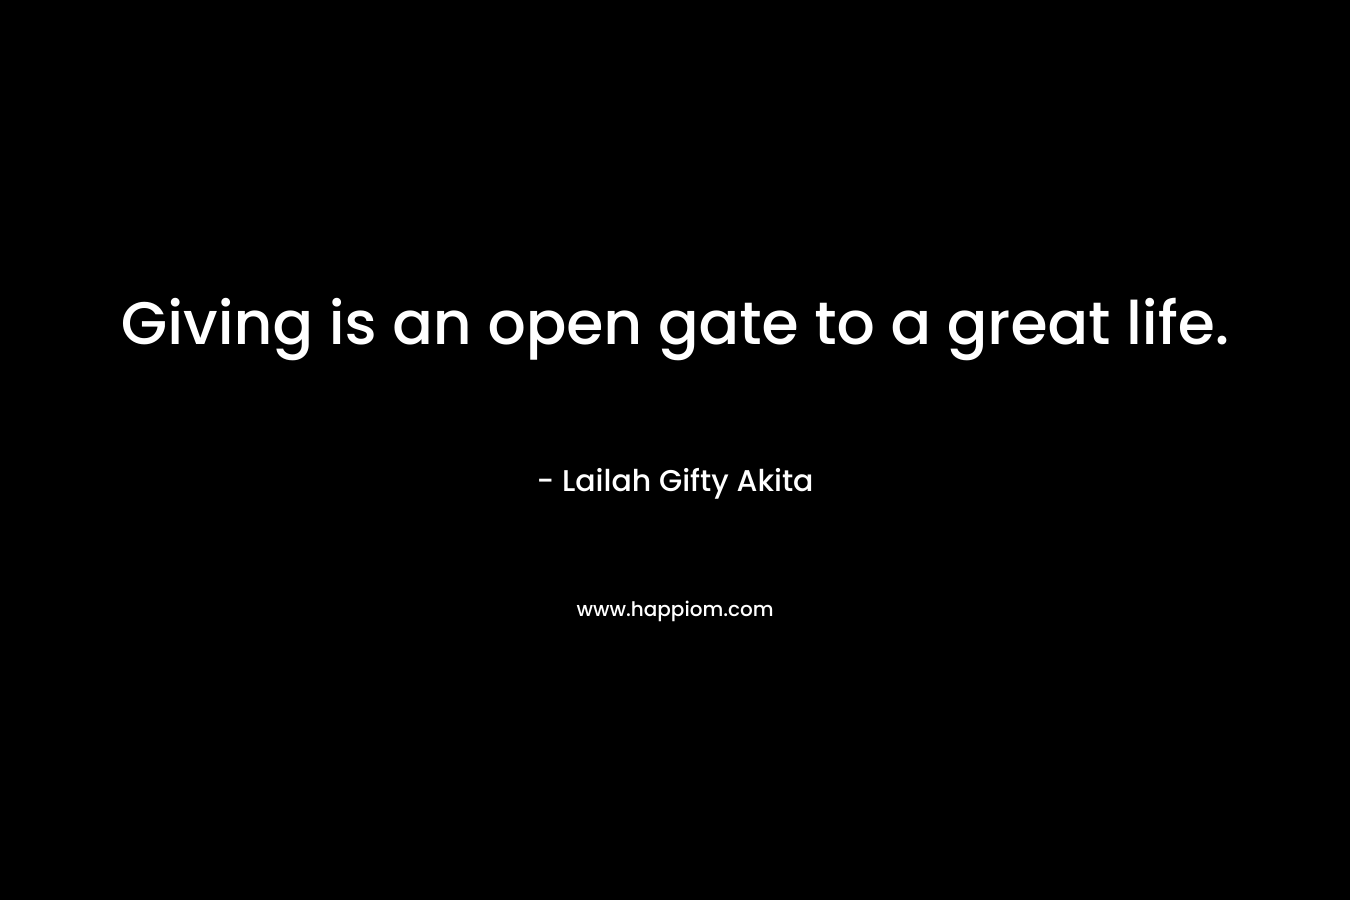 Giving is an open gate to a great life.